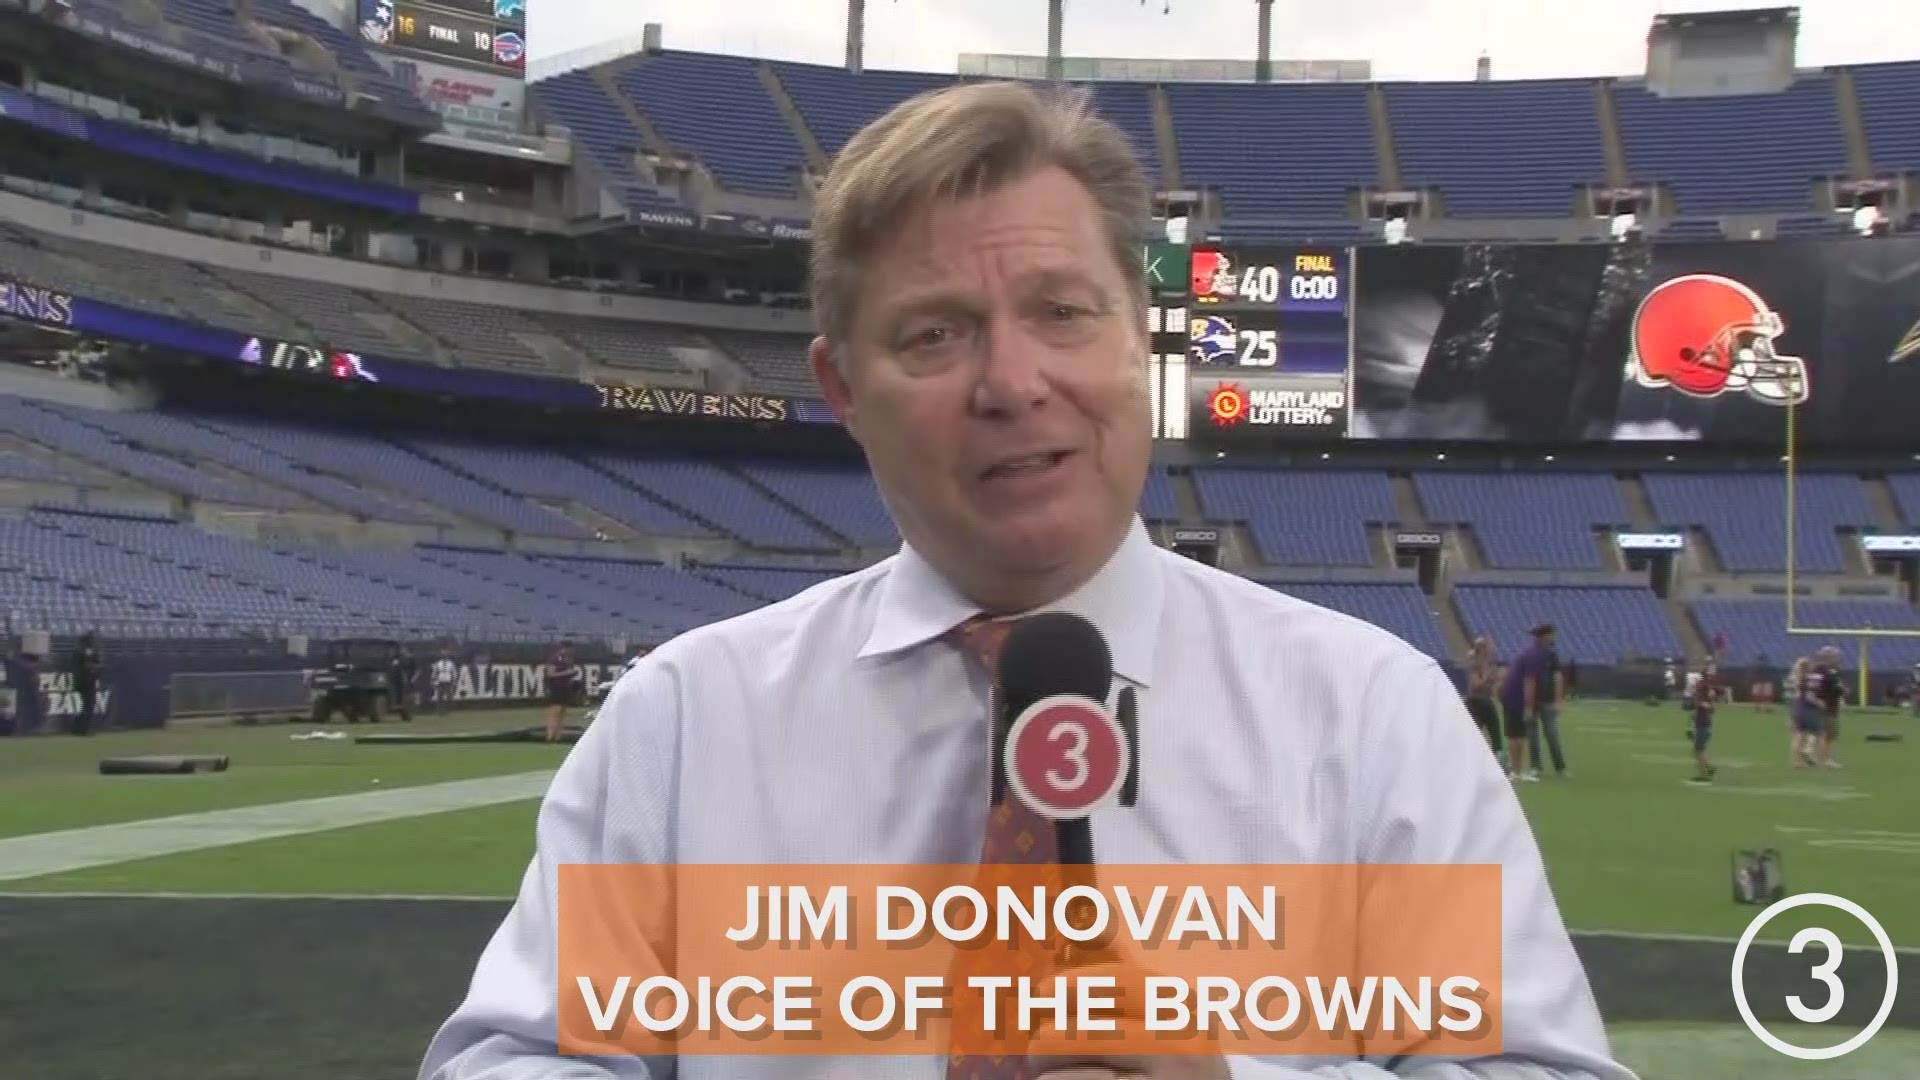 First place!  Voice of the Browns Jim Donovan recaps the Browns 40-25 victory of the Ravens.